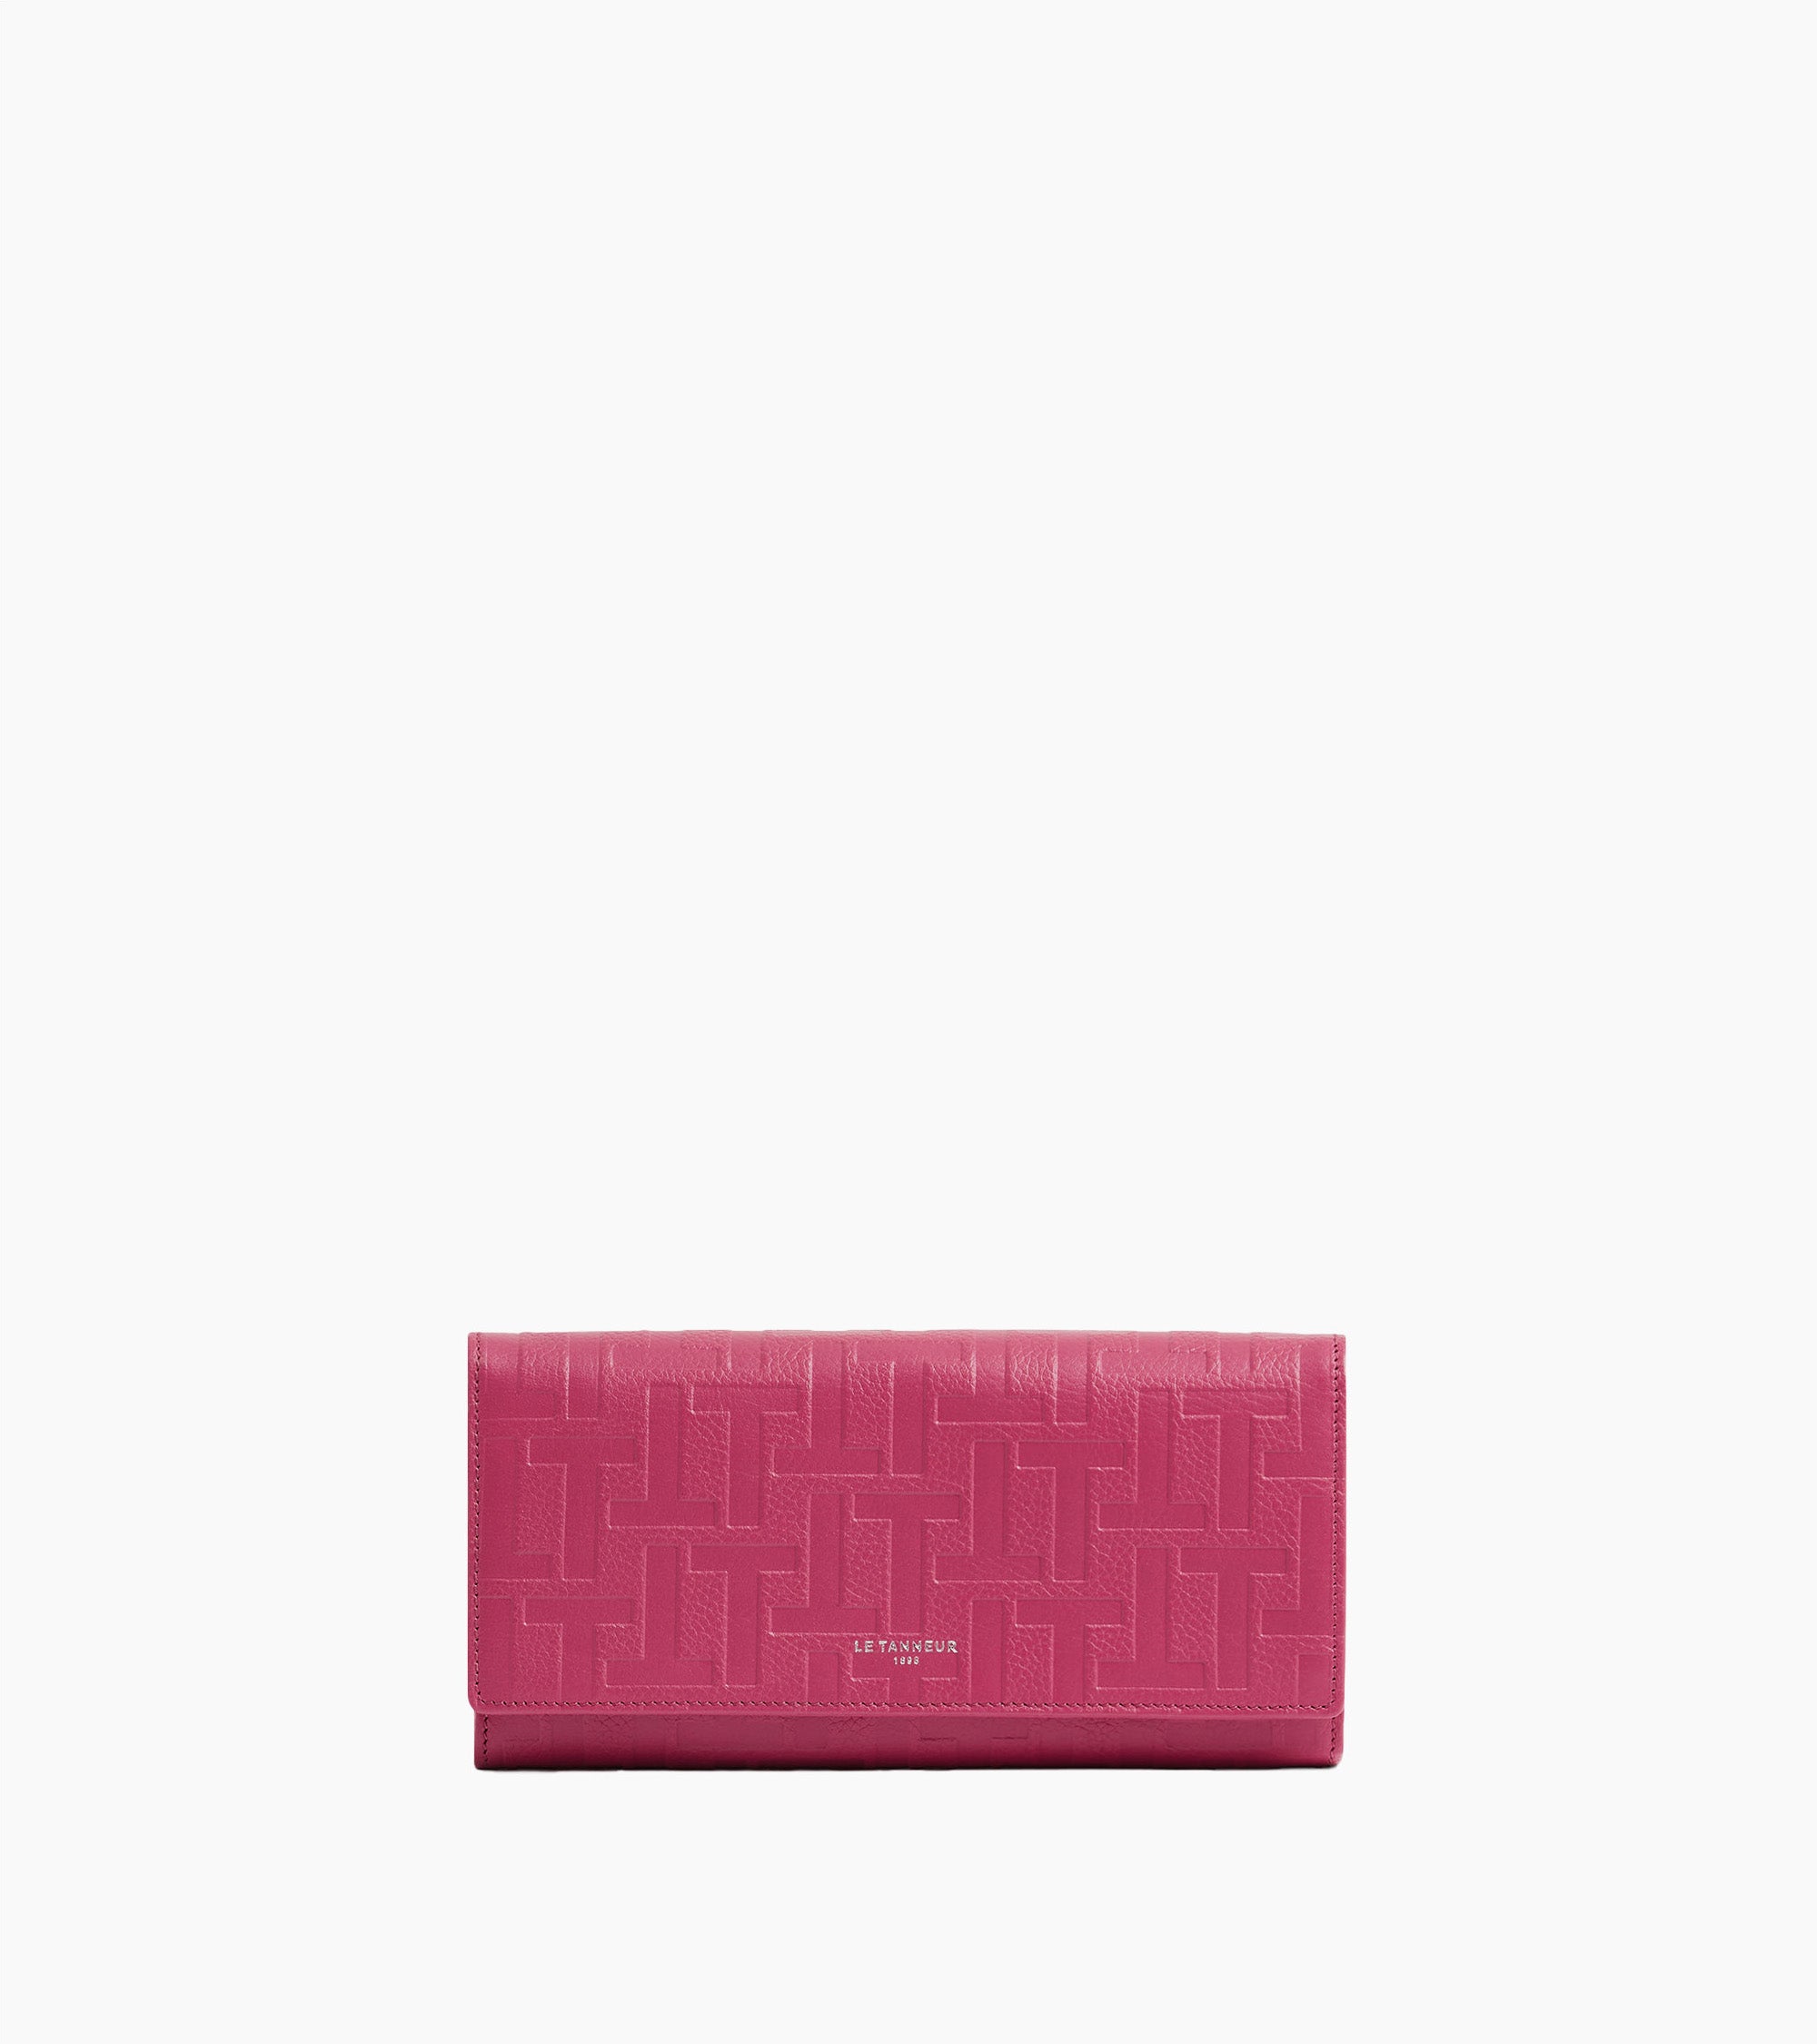 Emilie flap closure travel companion in embossed T leather